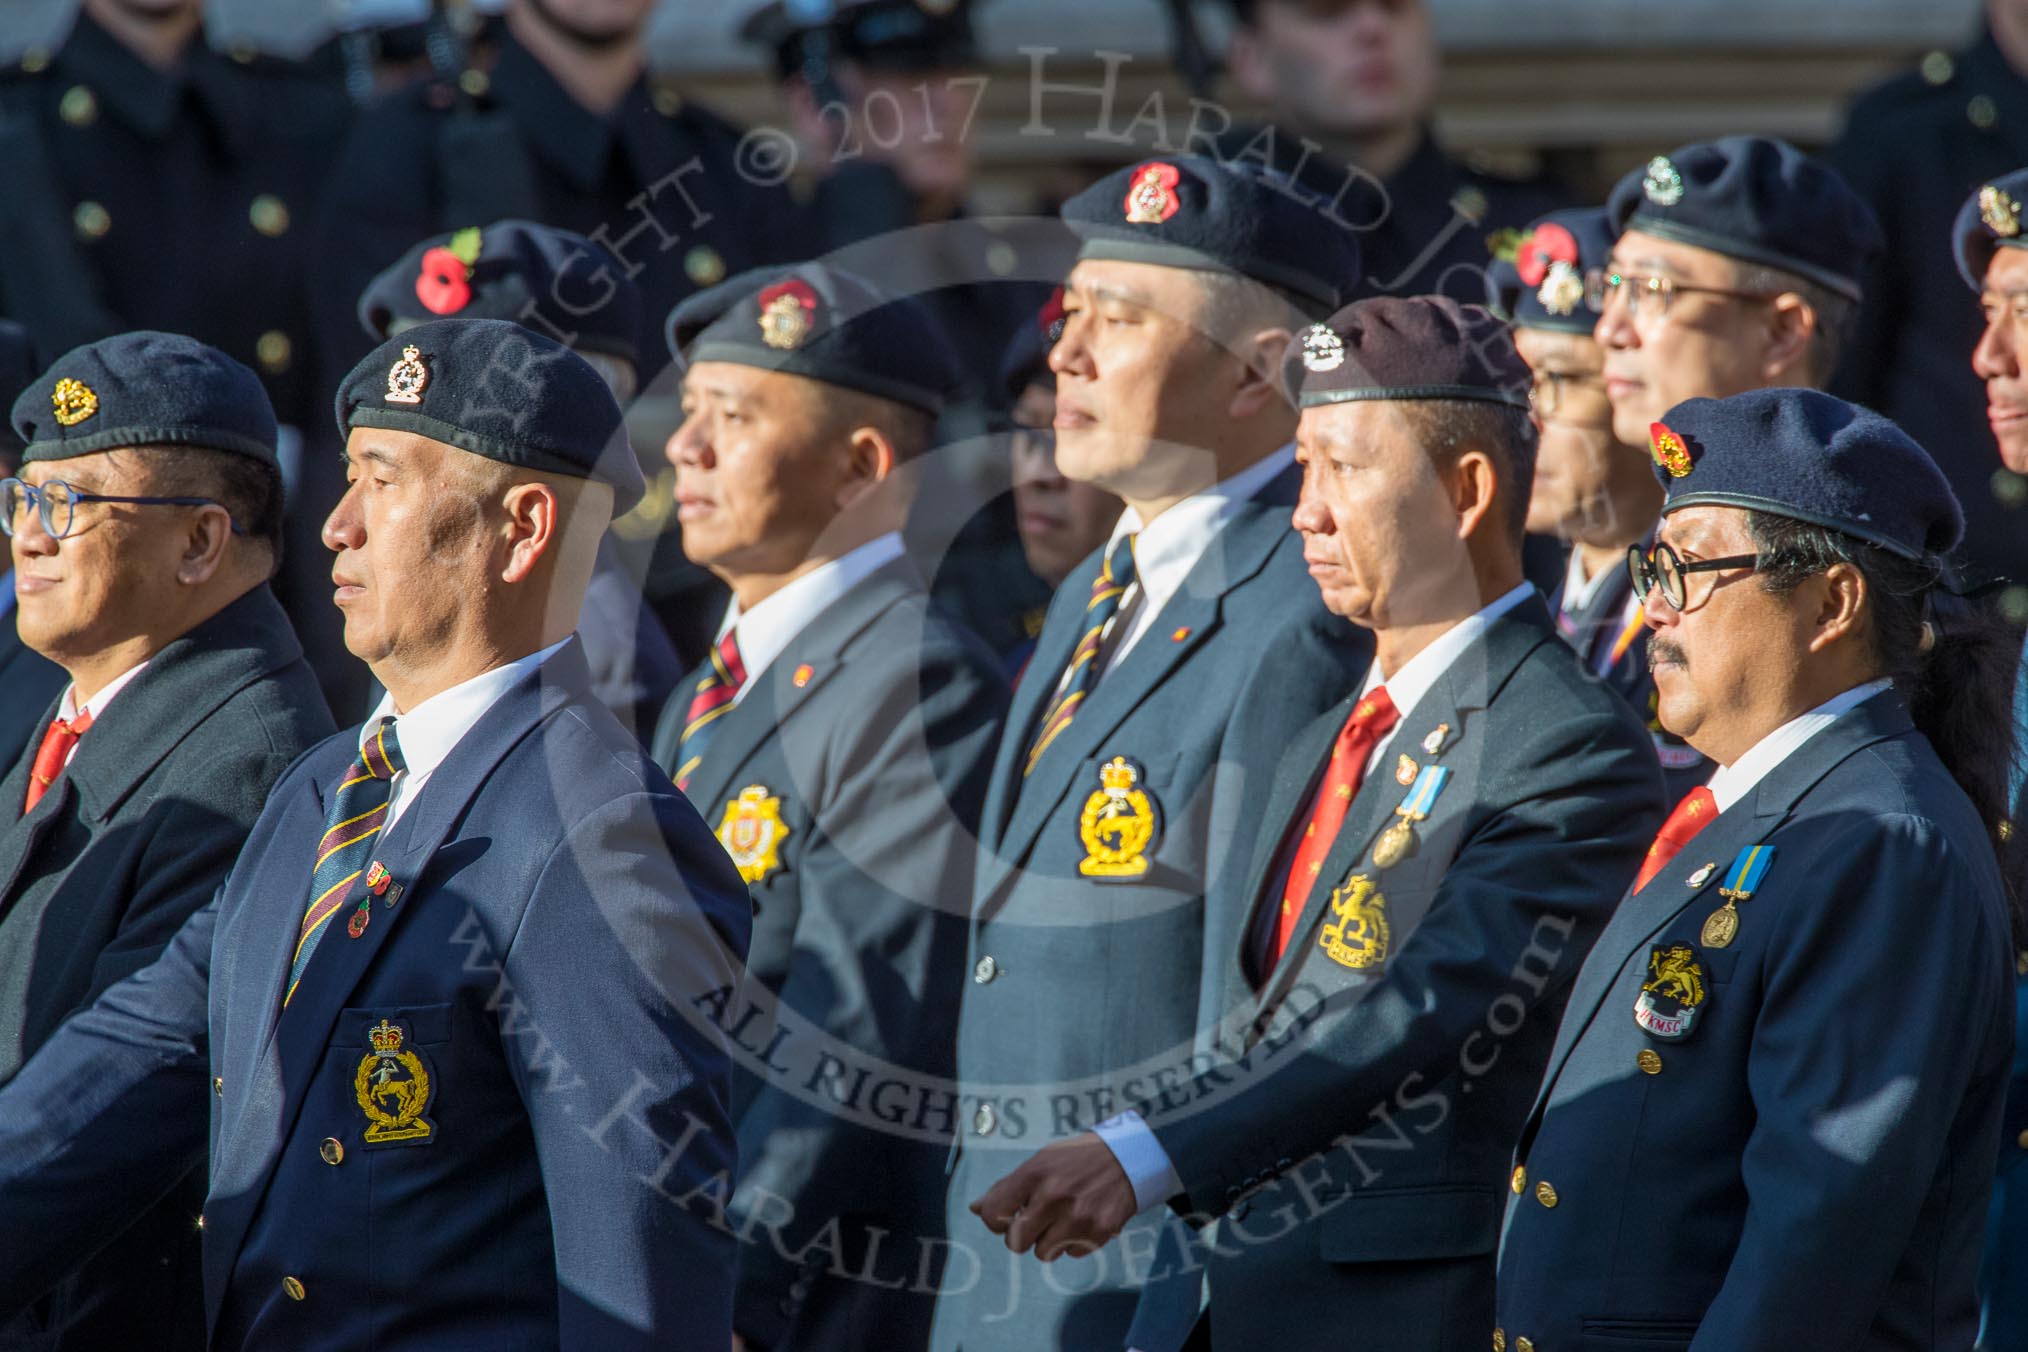 Hong Kong Military Service Corps - HKMSC (Group D21, 36 members) during the Royal British Legion March Past on Remembrance Sunday at the Cenotaph, Whitehall, Westminster, London, 11 November 2018, 12:24.